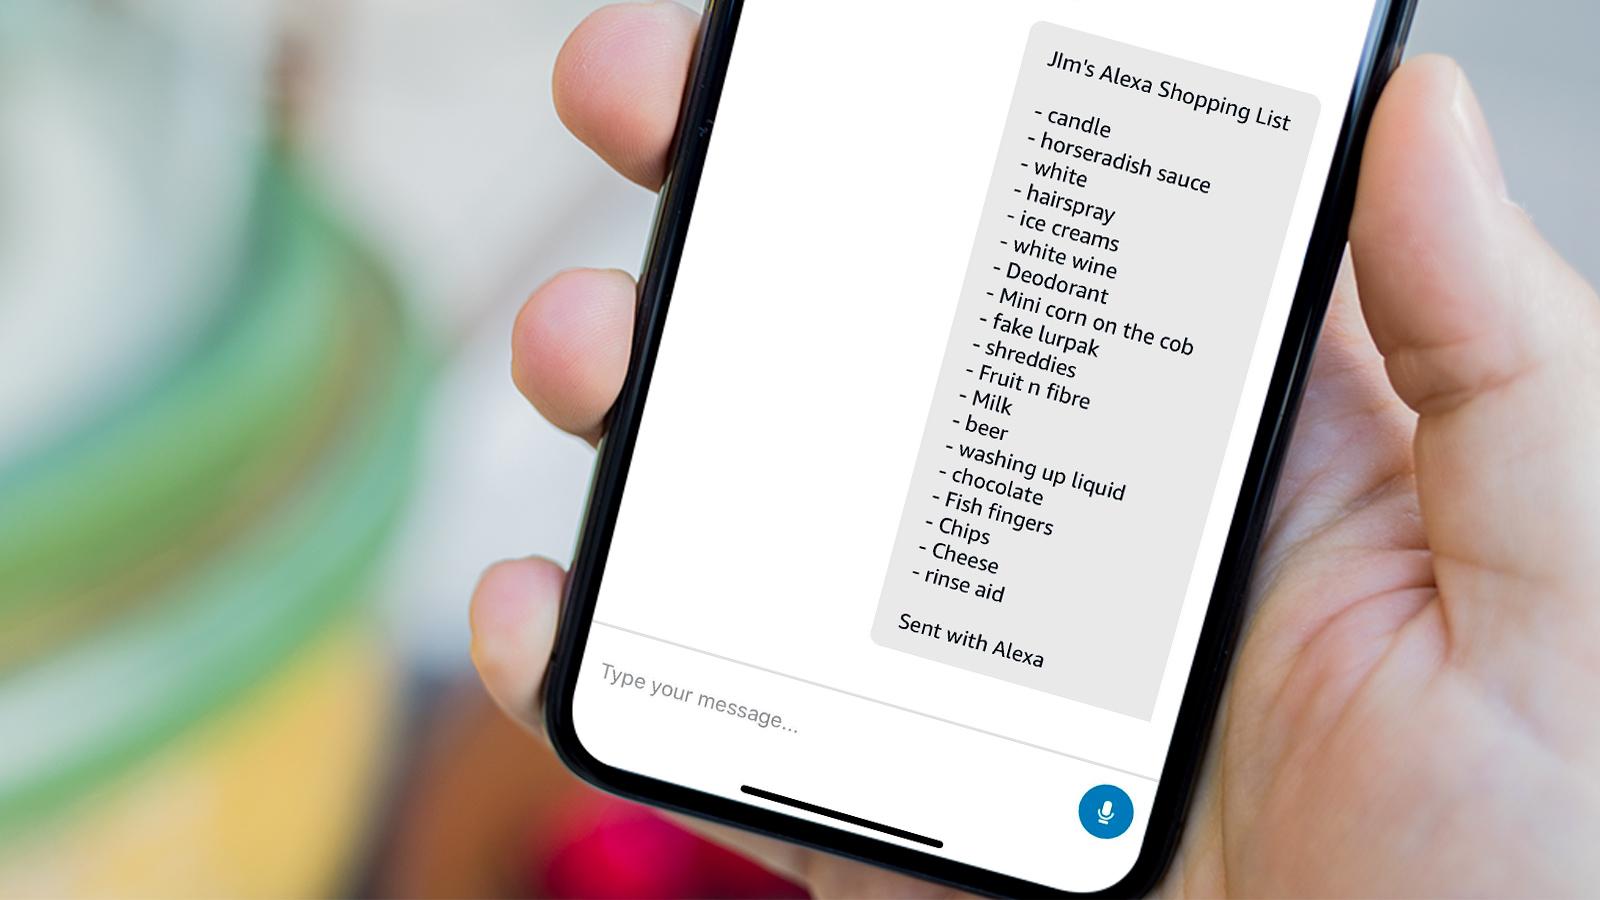 How To Get Shopping List From Alexa